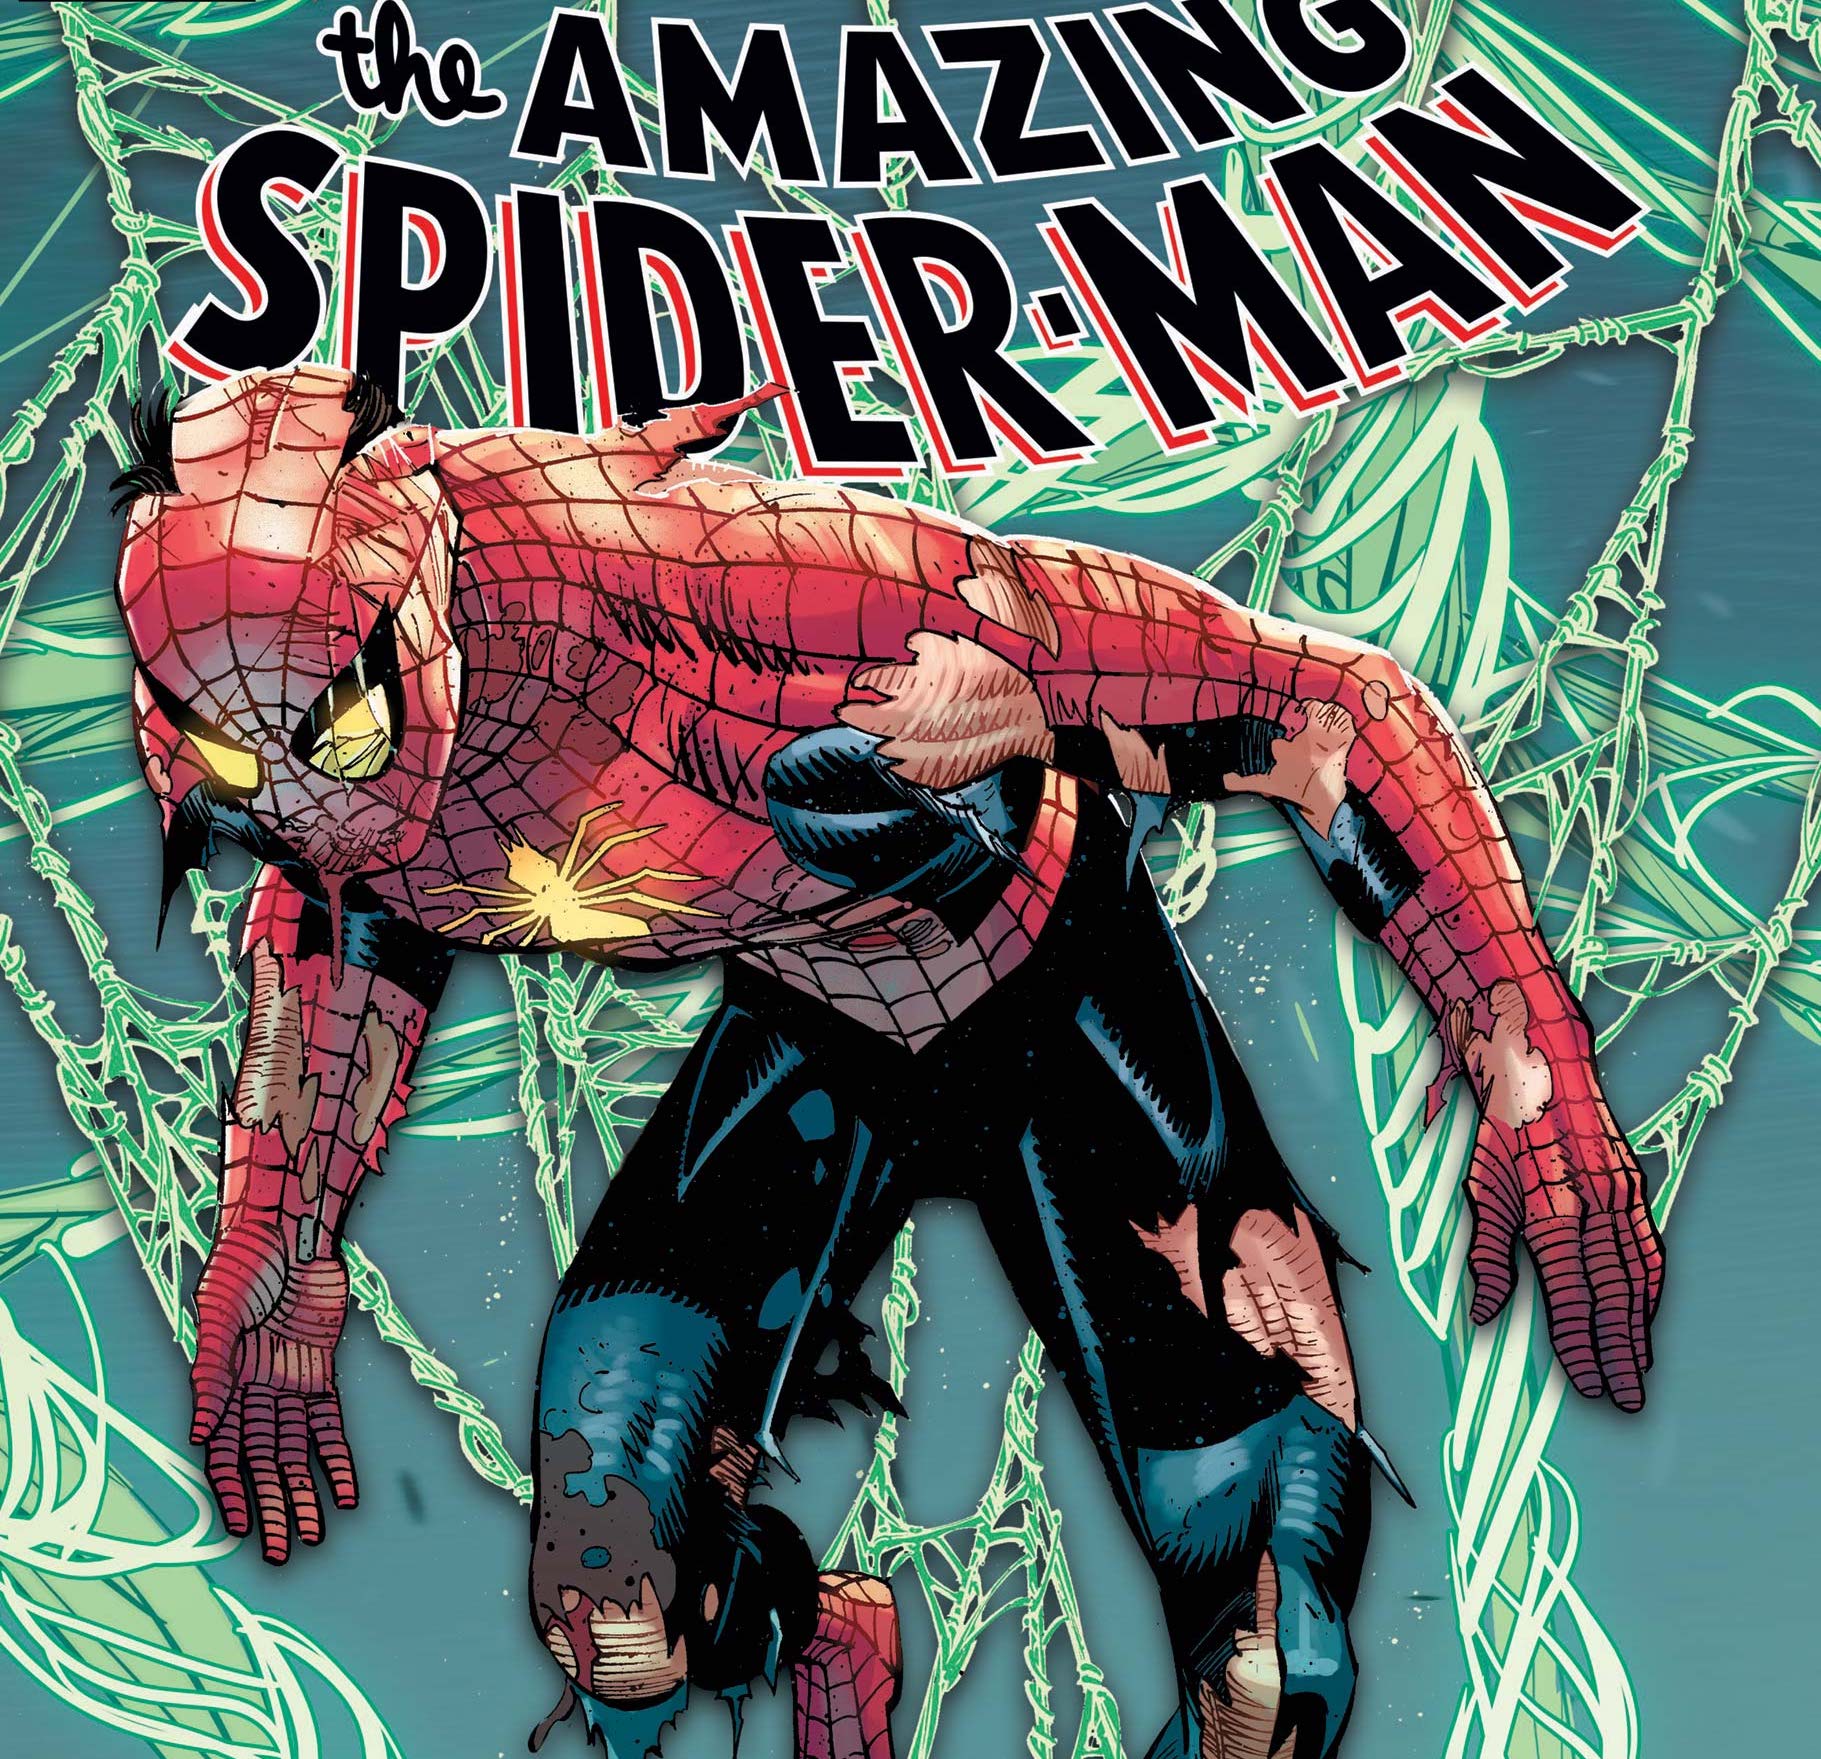 'The Amazing Spider-Man' #17 introduces the Insidious Six